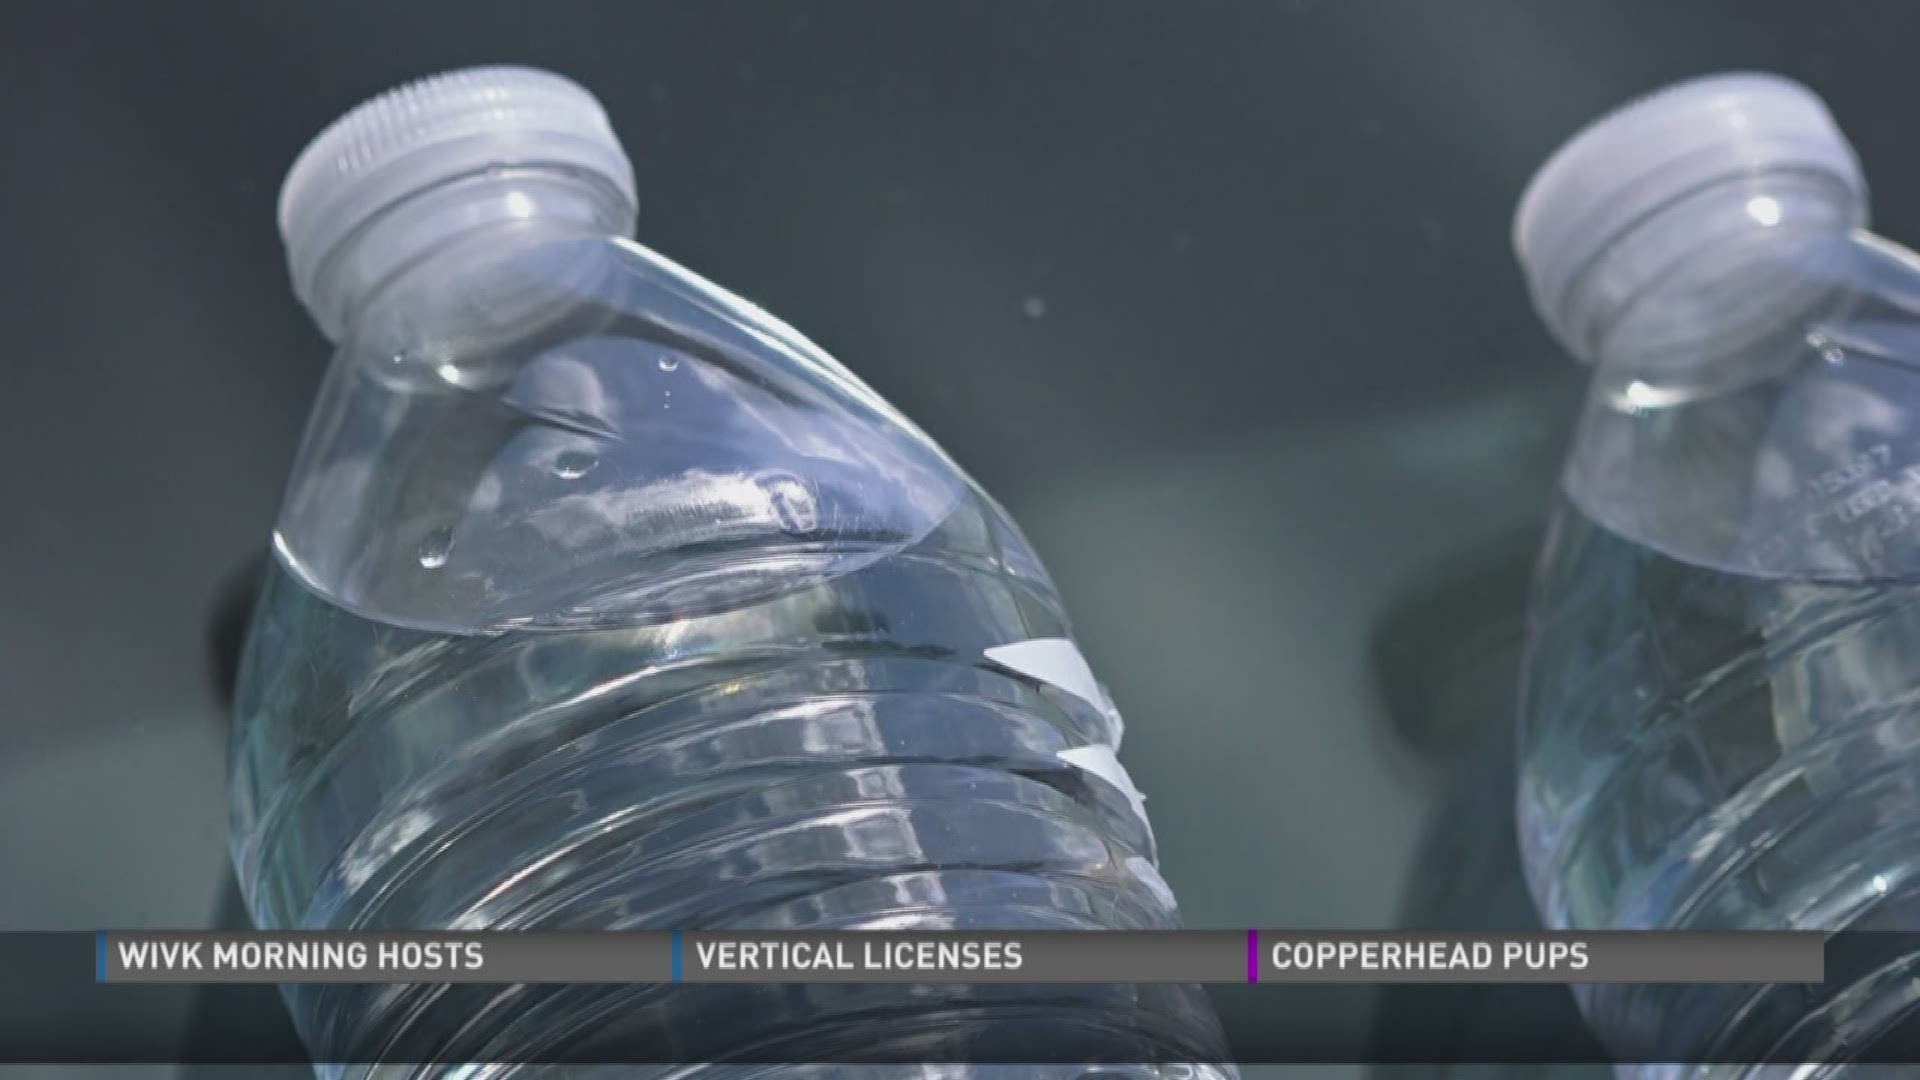 VERIFY: Is it safe to drink water from a plastic bottle left in a